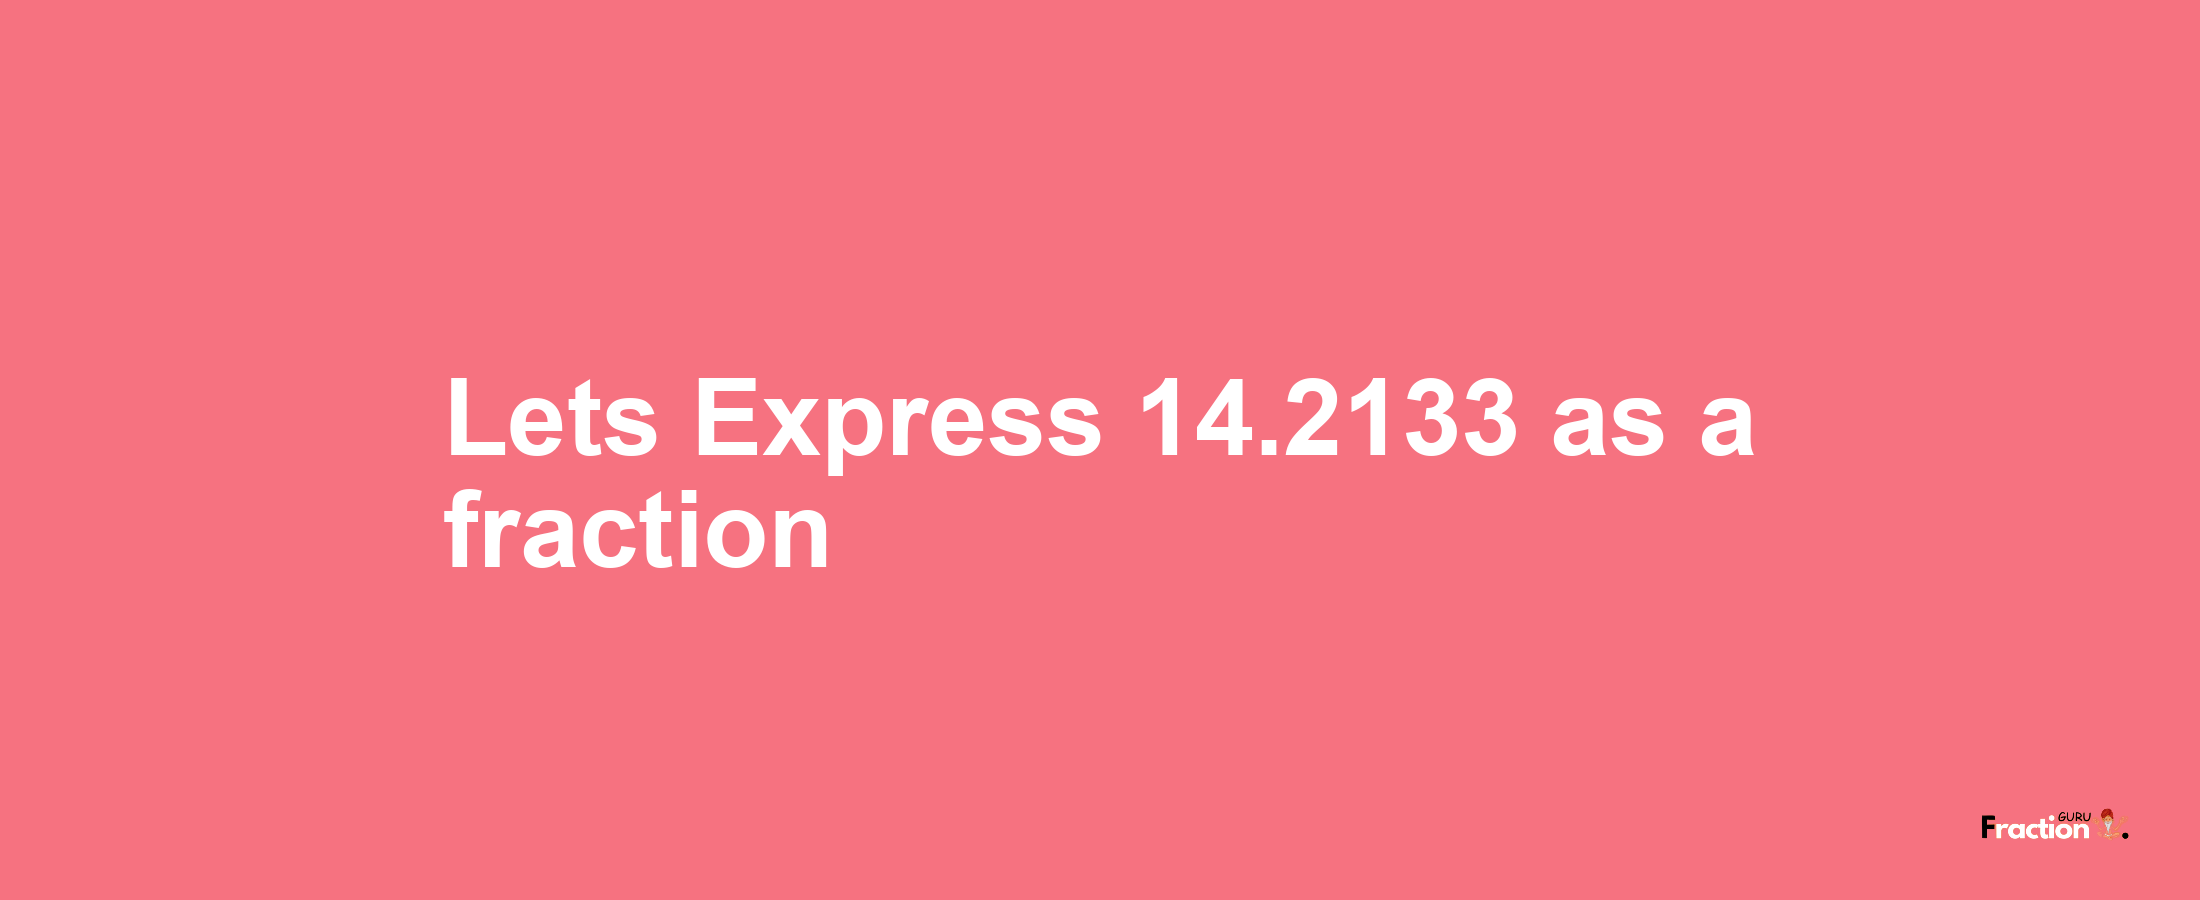 Lets Express 14.2133 as afraction